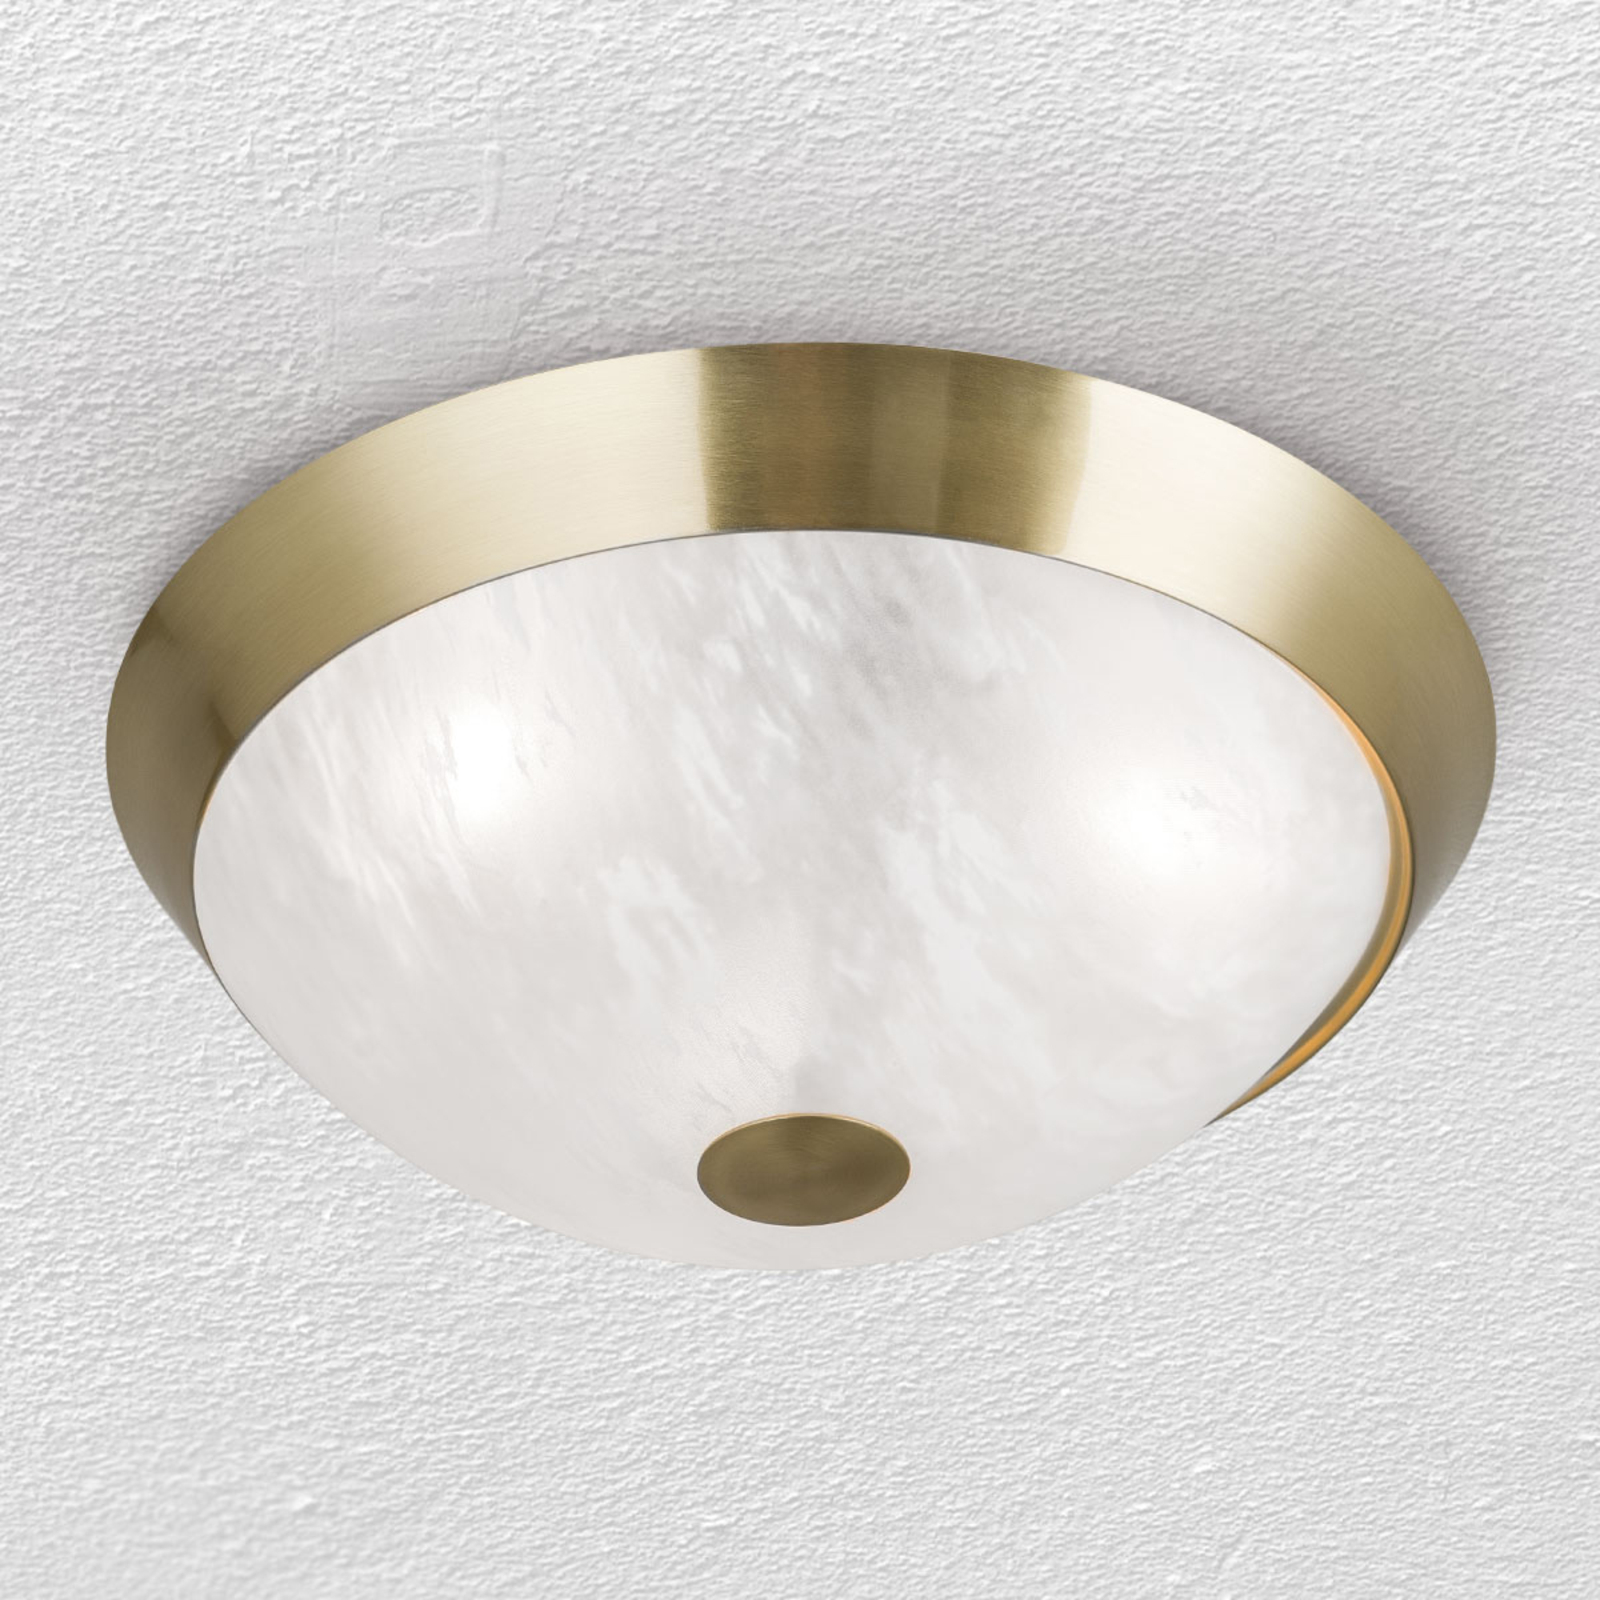 34 cm ceiling lamp Jaya with glass lampshade